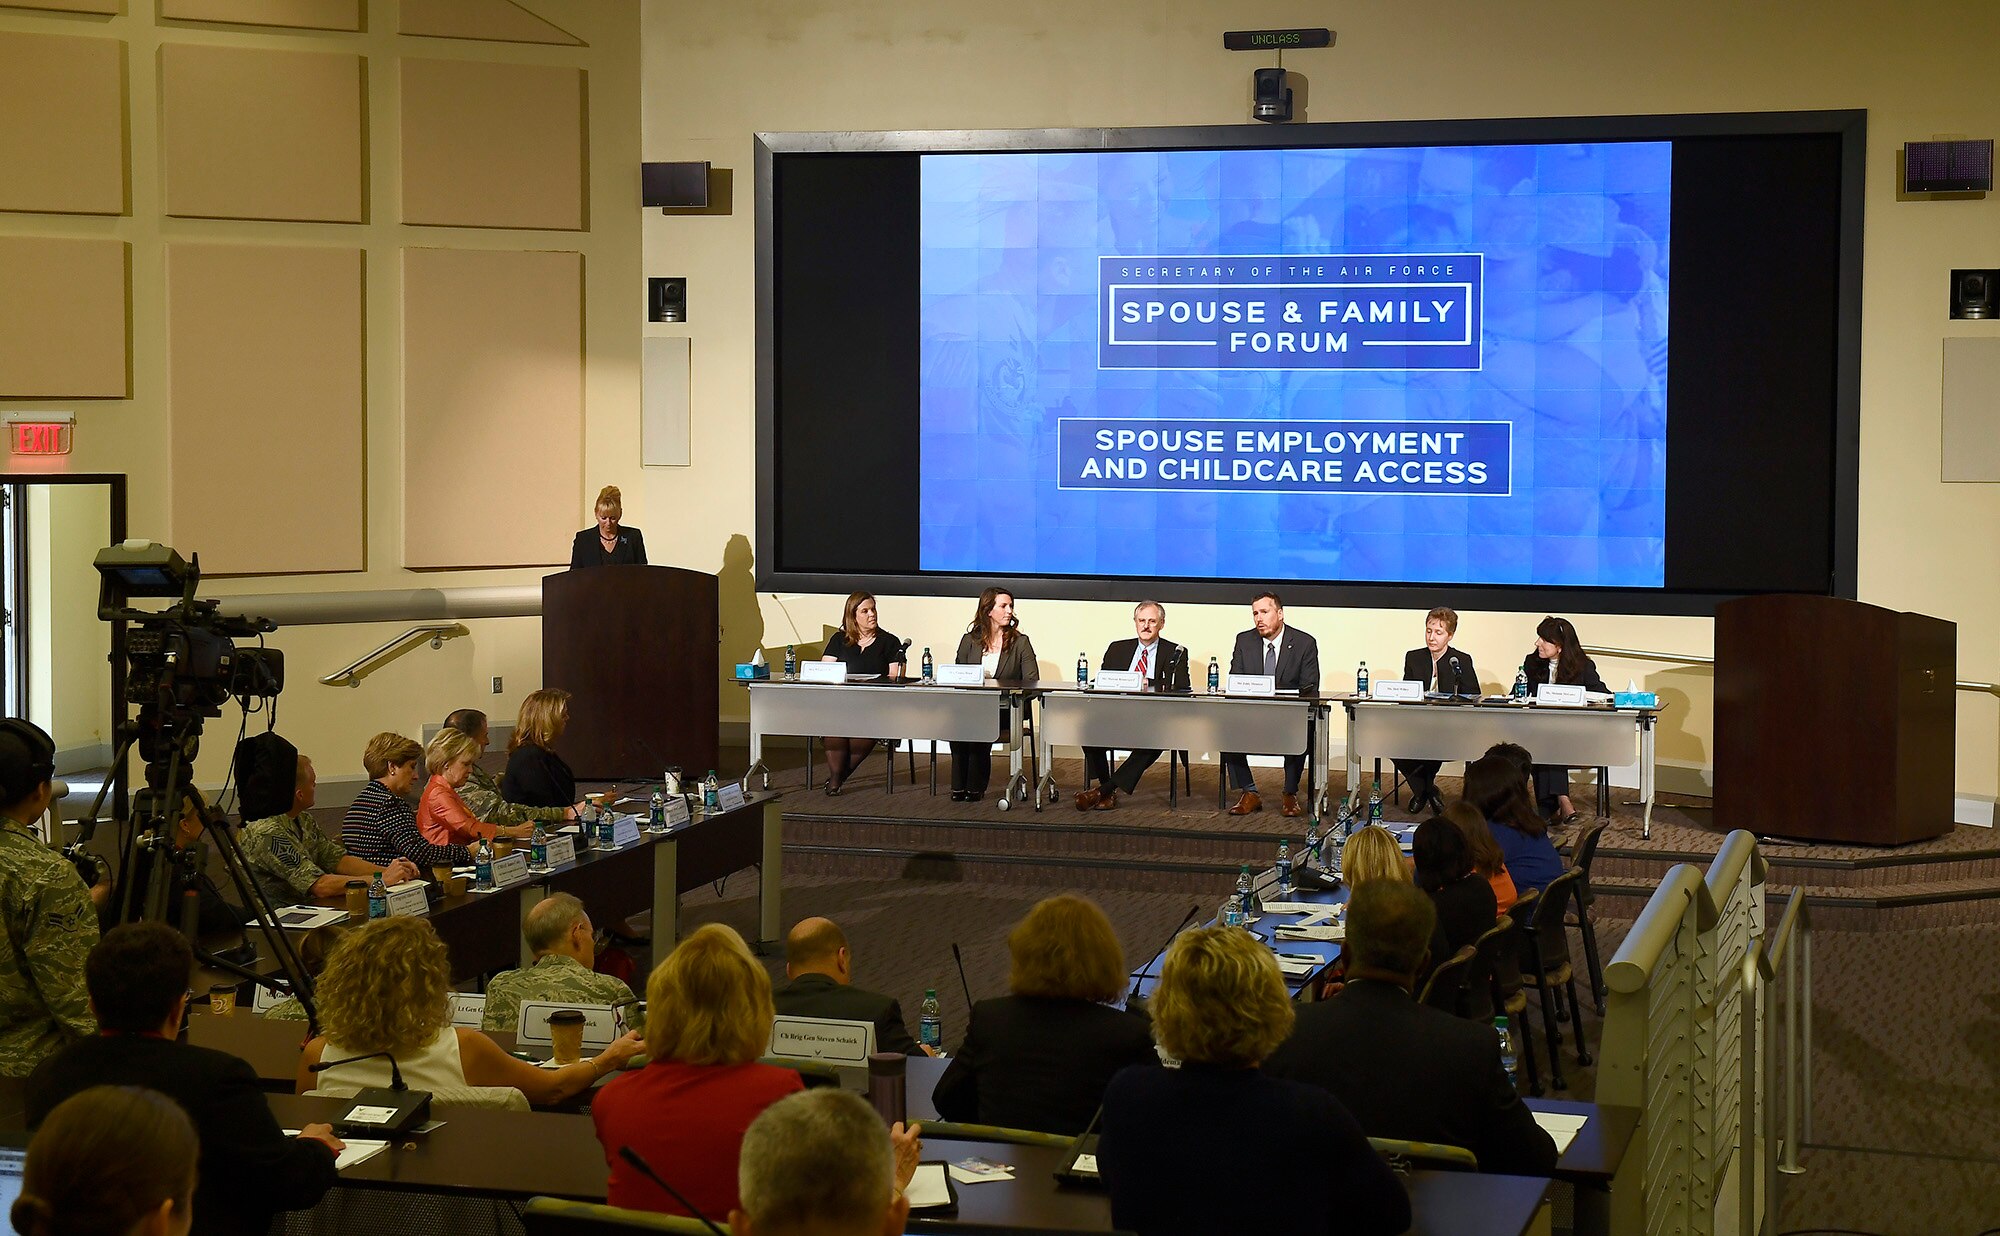 Michelle Padgett, from the office of the Air Force chief of staff, moderates a panel discussion during the Secretary of the Air Force Spouse and Family Forum at Joint Base Andrews, Md., Oct. 19, 2016. (U.S. Air Force photo/Scott M. Ash)